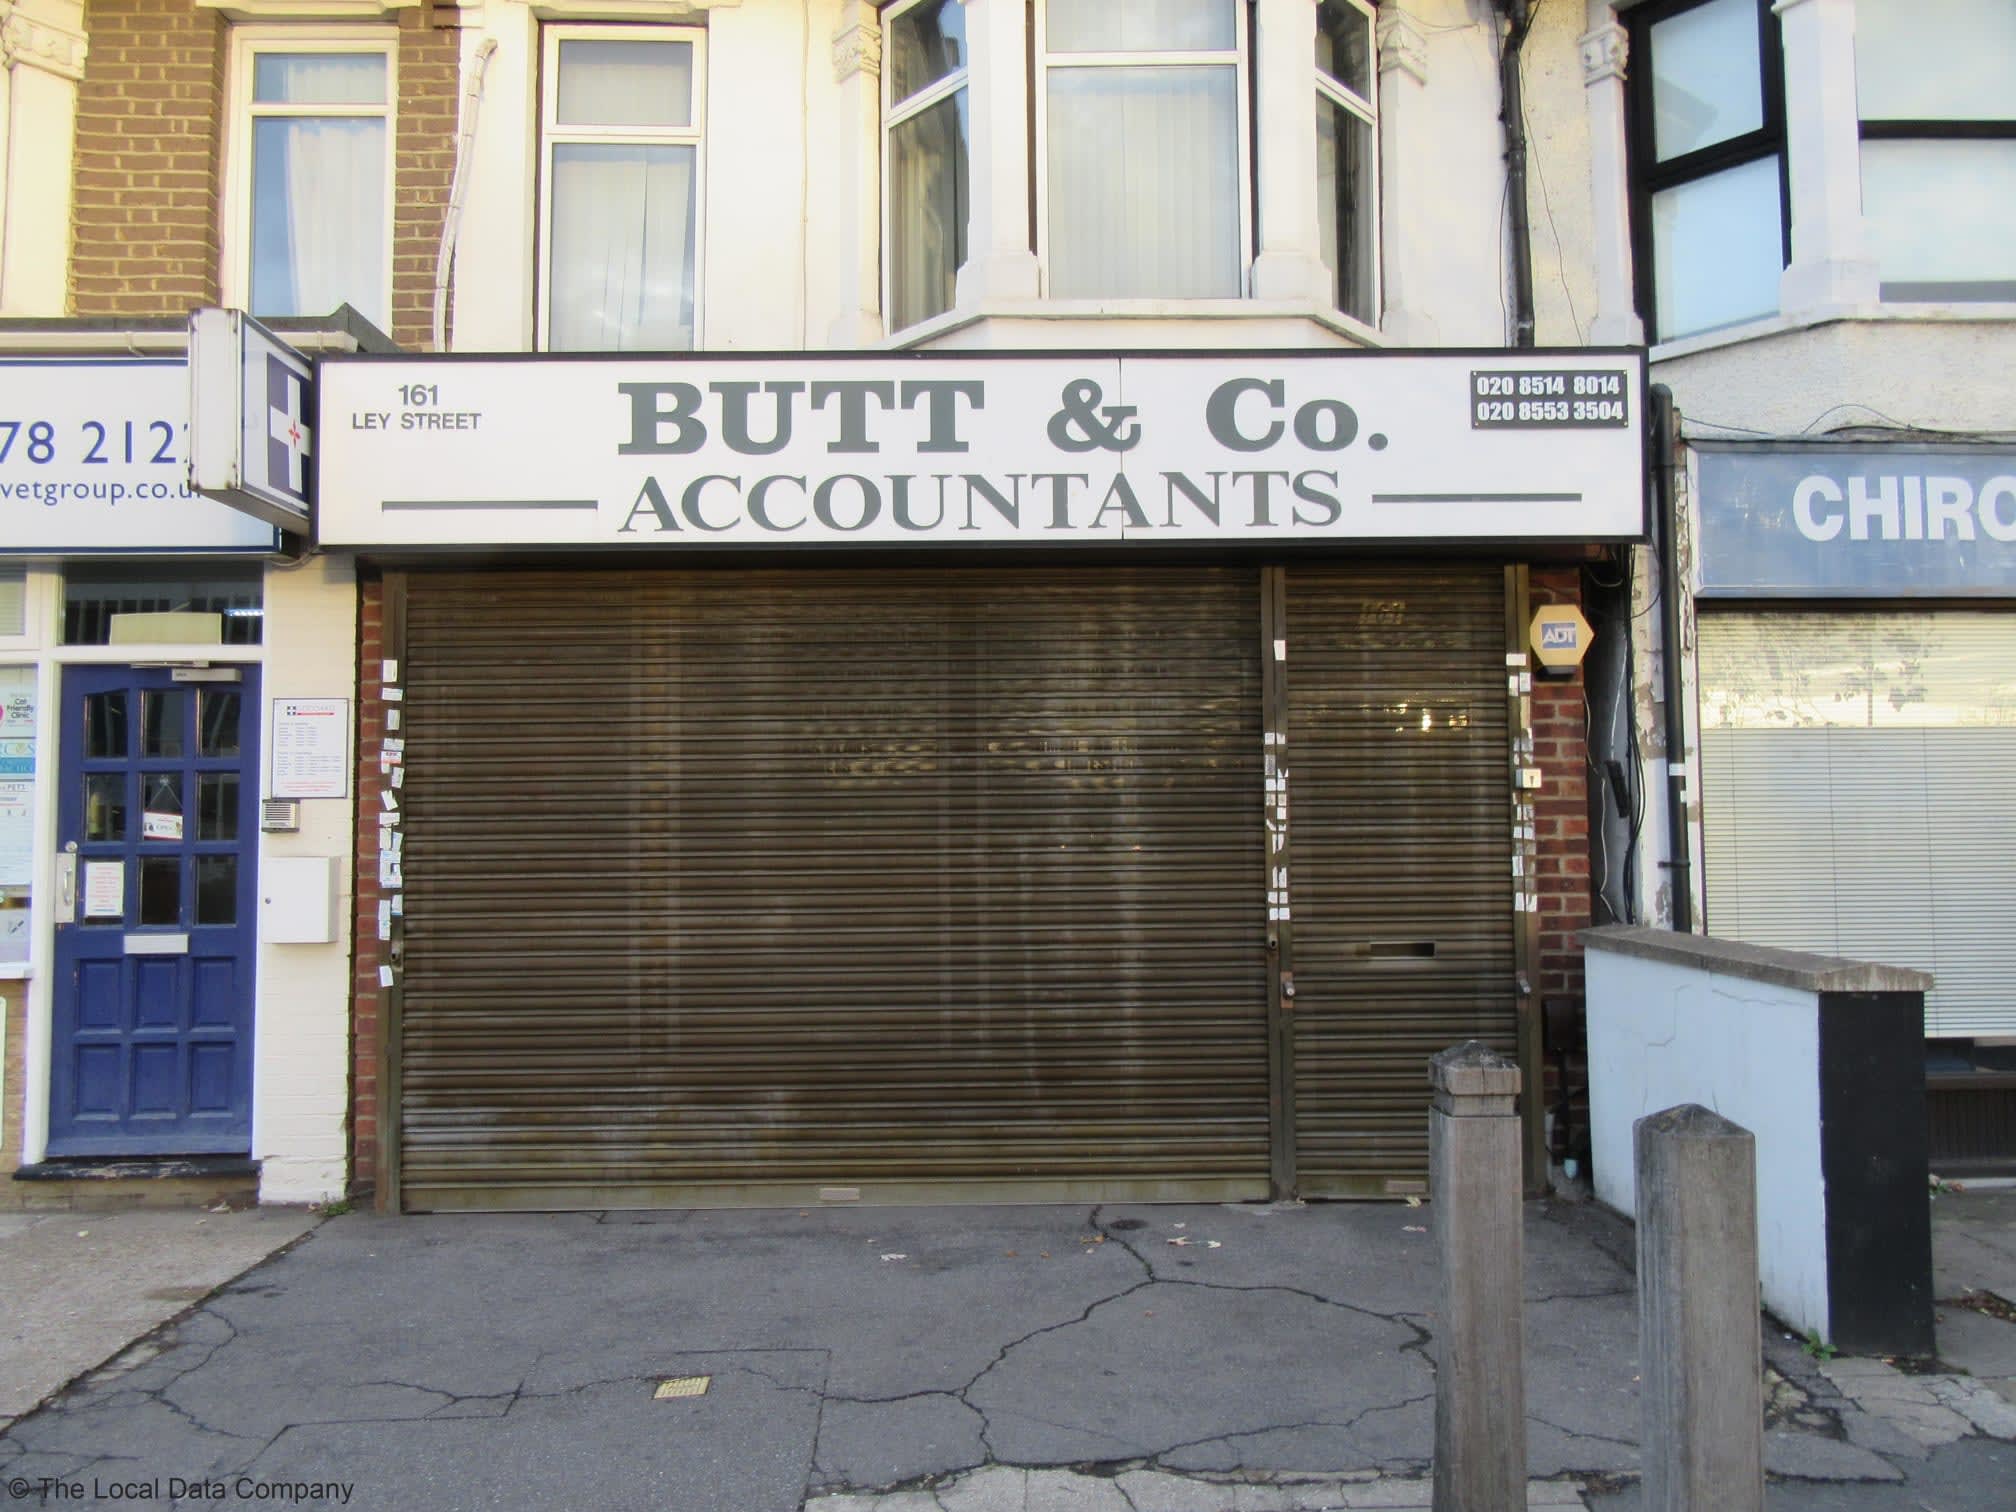 Images Butt & Co Accountants